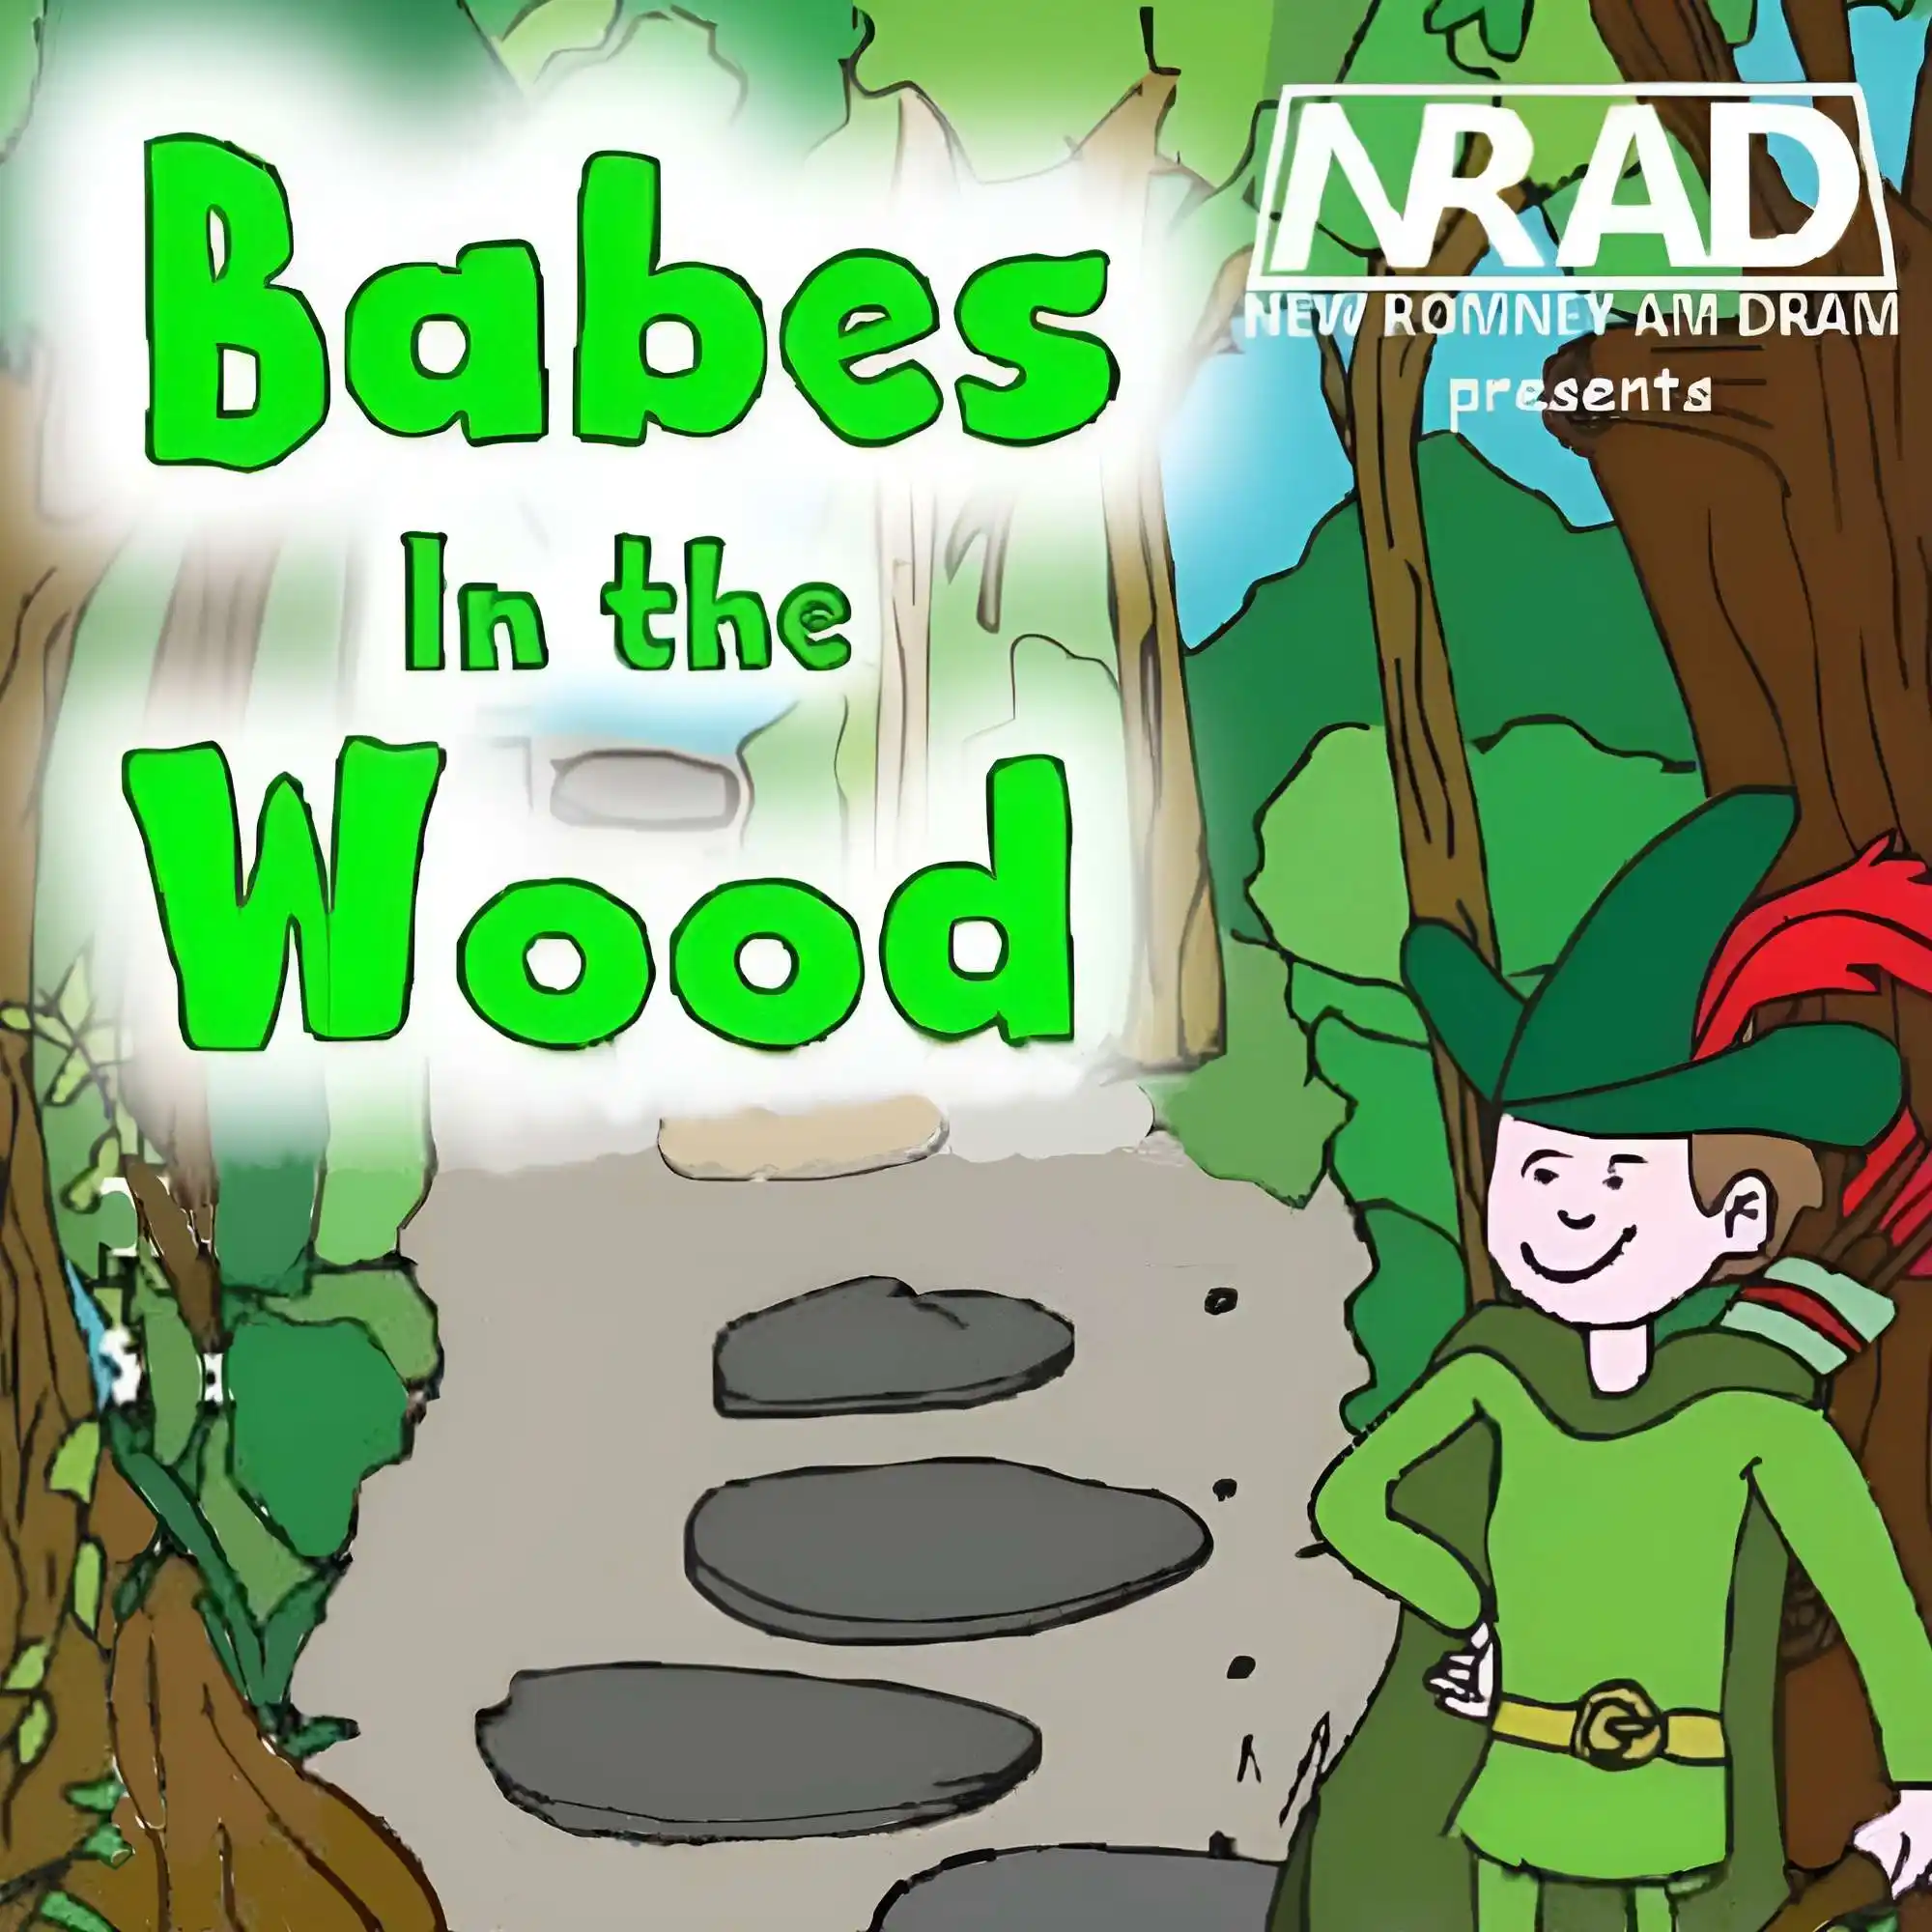 Babes in the wood